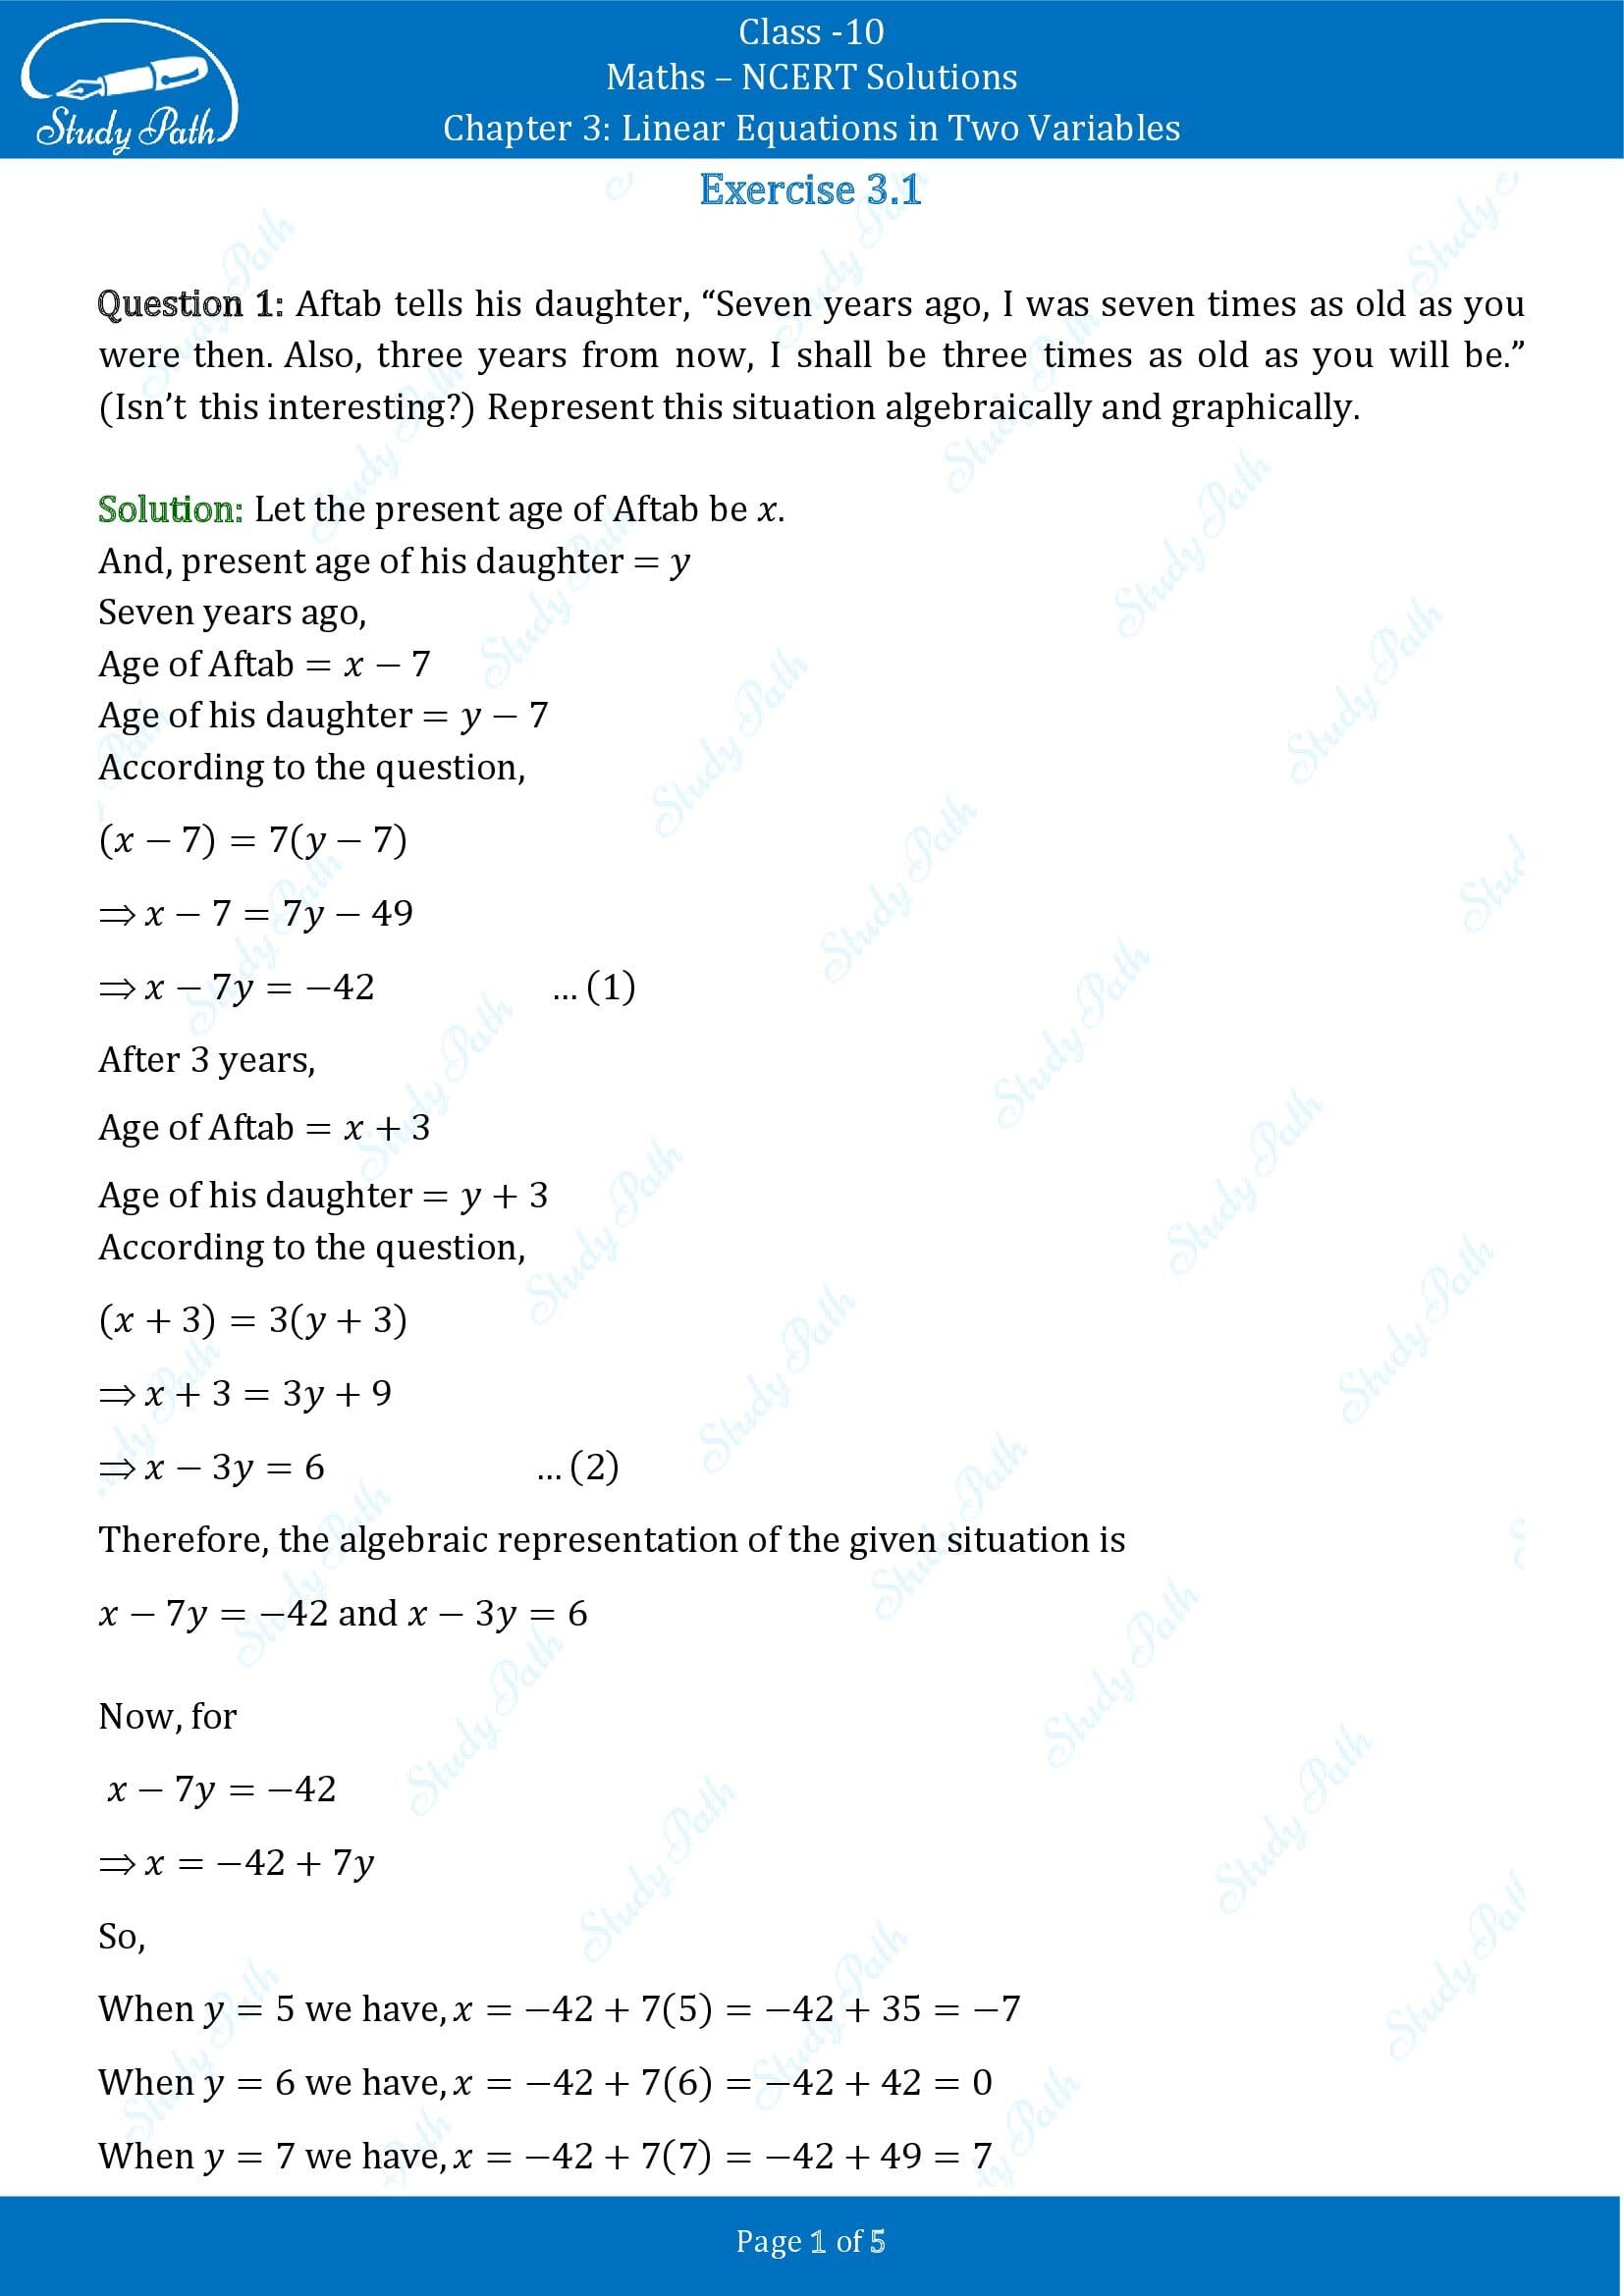 NCERT Solutions for Class 10 Maths Chapter 3 Linear Equations in Two Variables Exercise 3.1 00001